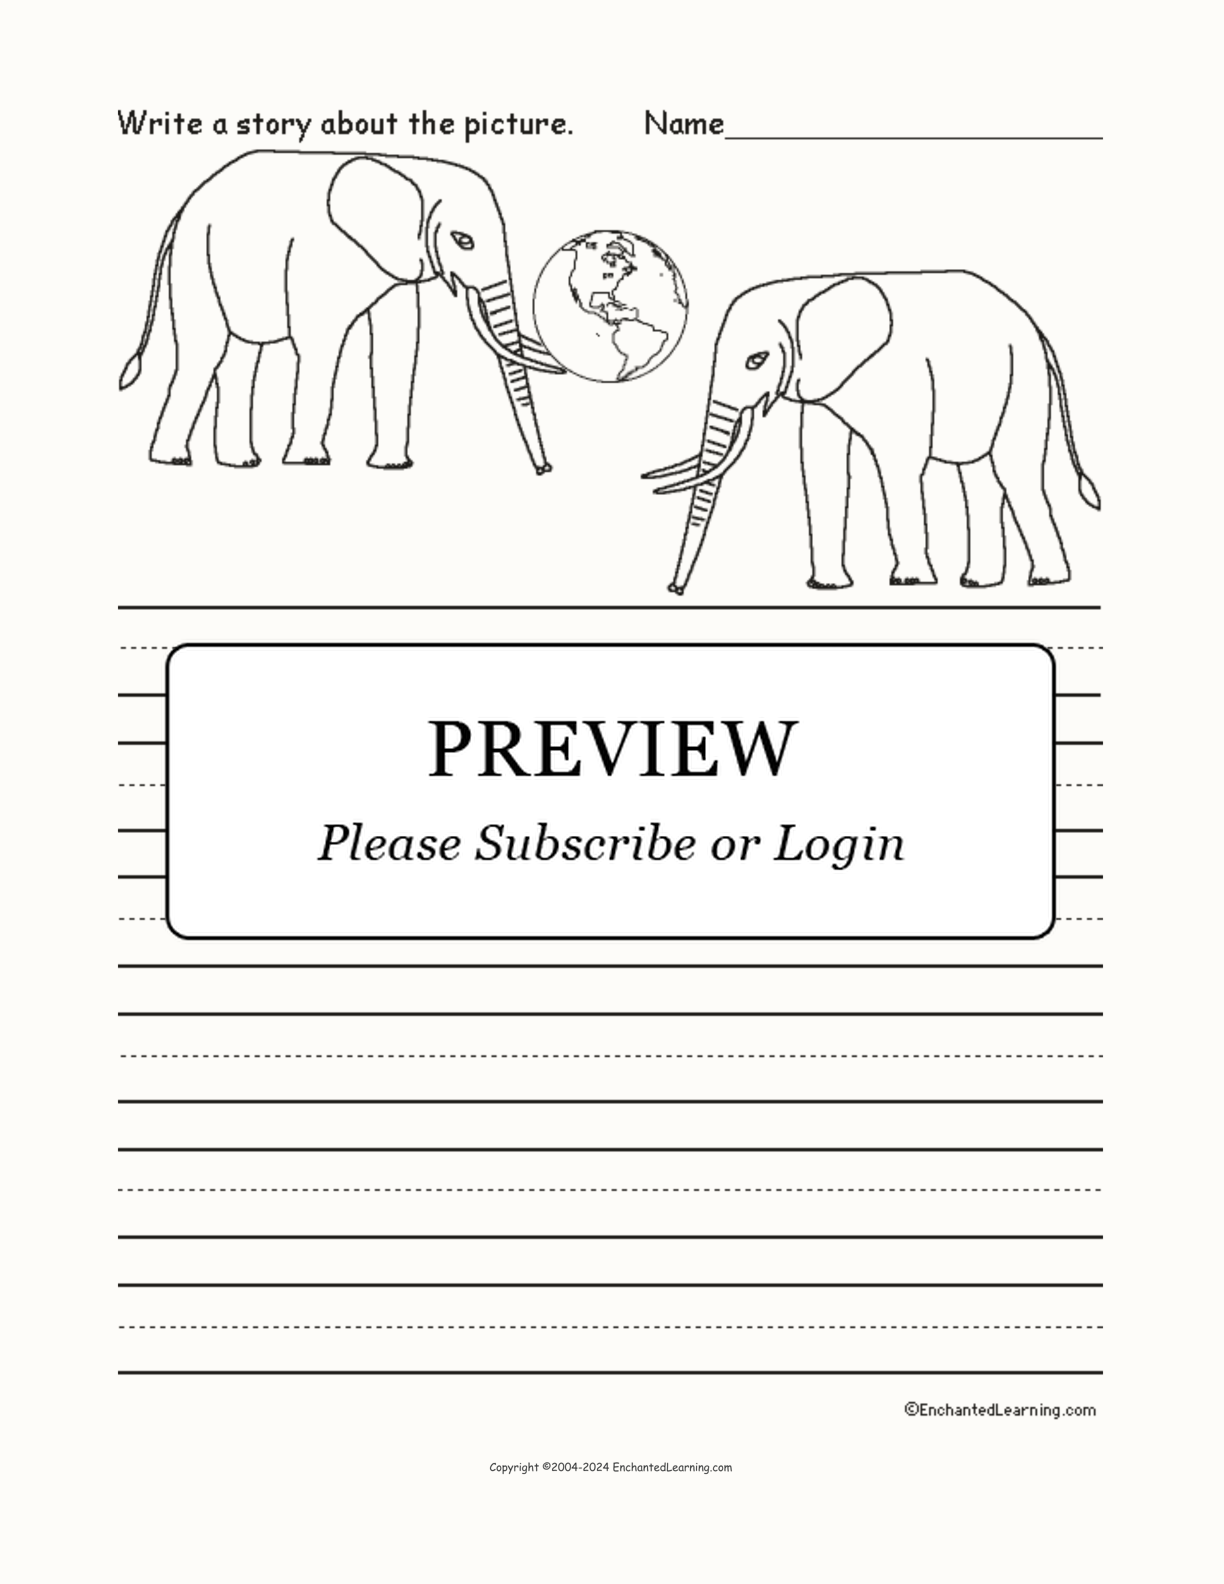 Picture Prompts - E interactive worksheet page 1